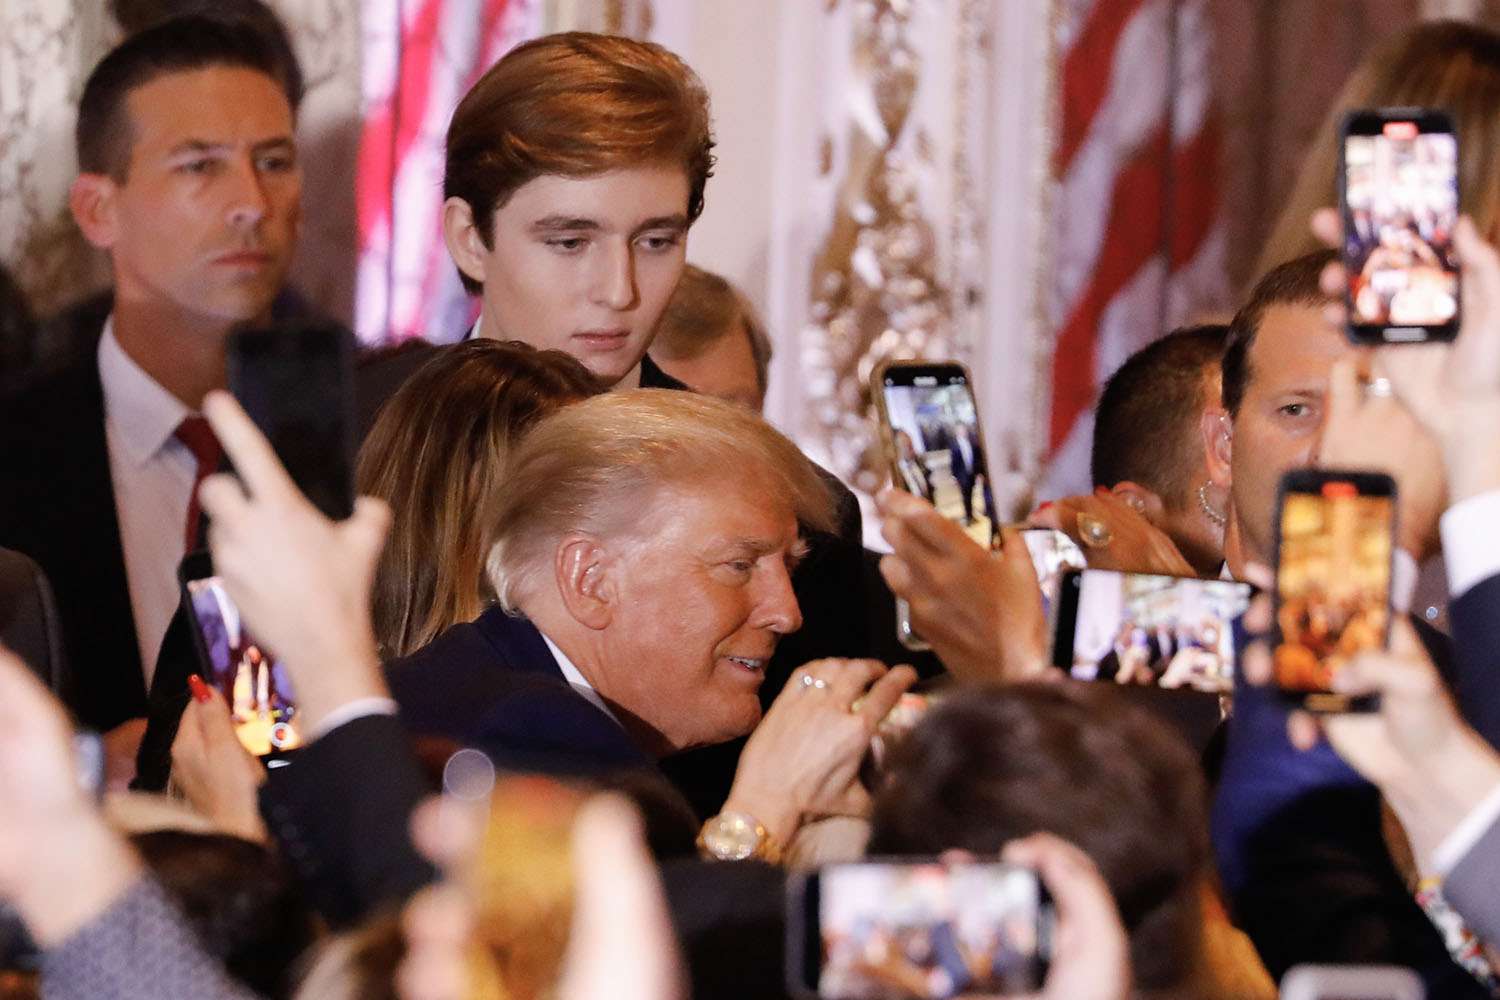 Barron Trump, 18, Is Officially Entering the Political Arena with Highest-Profile Role to Date